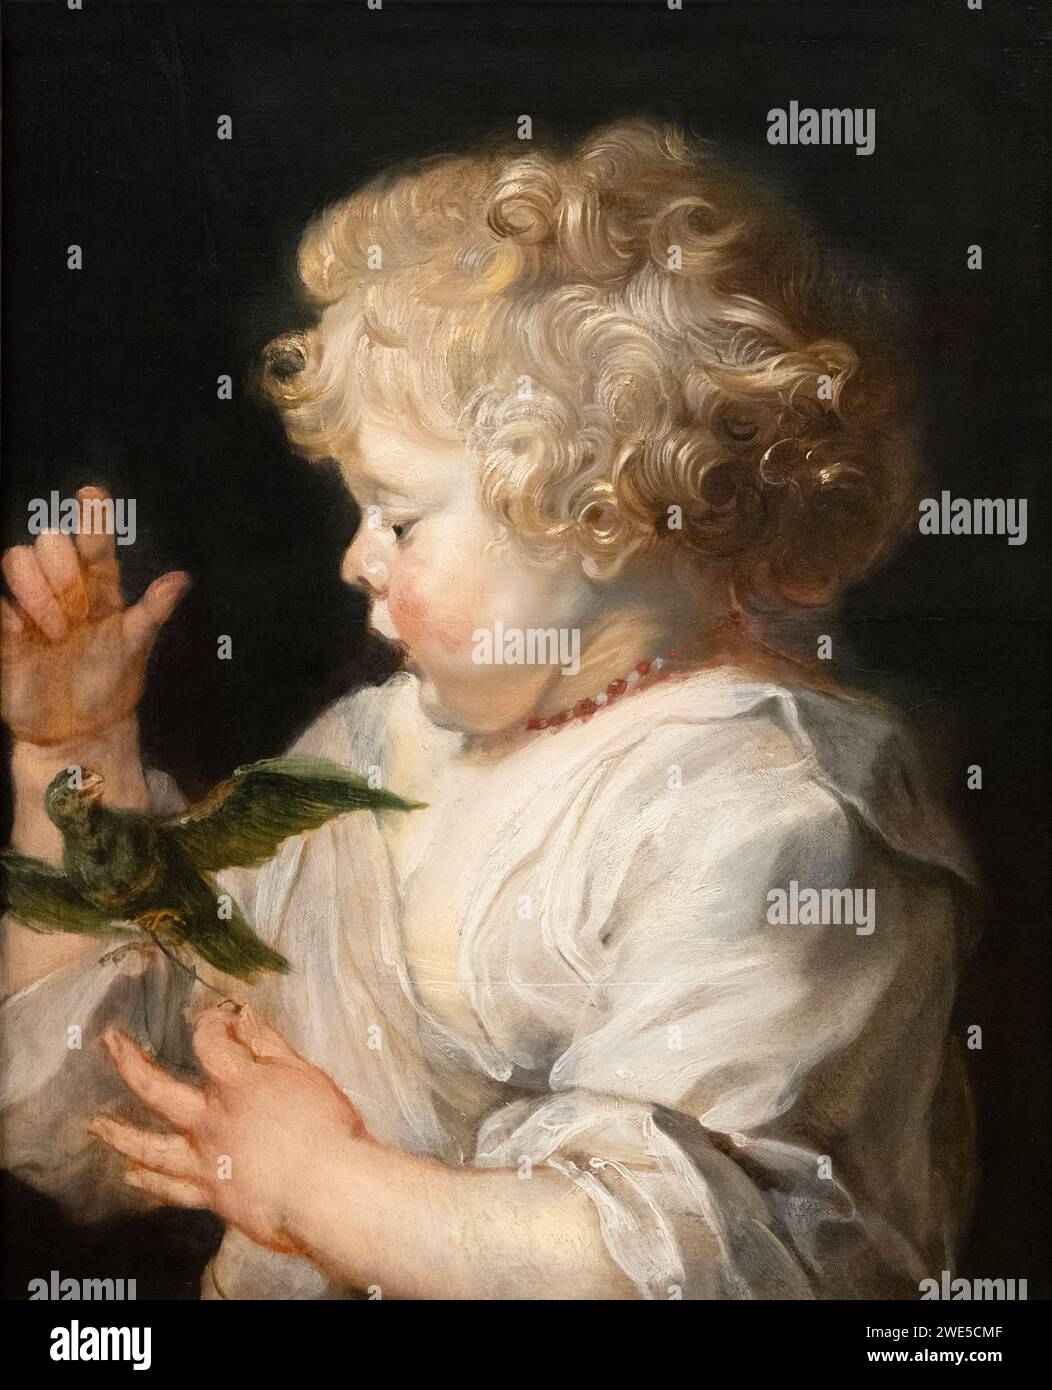 Peter Paul Rubens painting 'The Child with the Bird' c. 1614 and after 1625. One of the few paintings Rubens did of children. 1600s baroque painting. Stock Photo